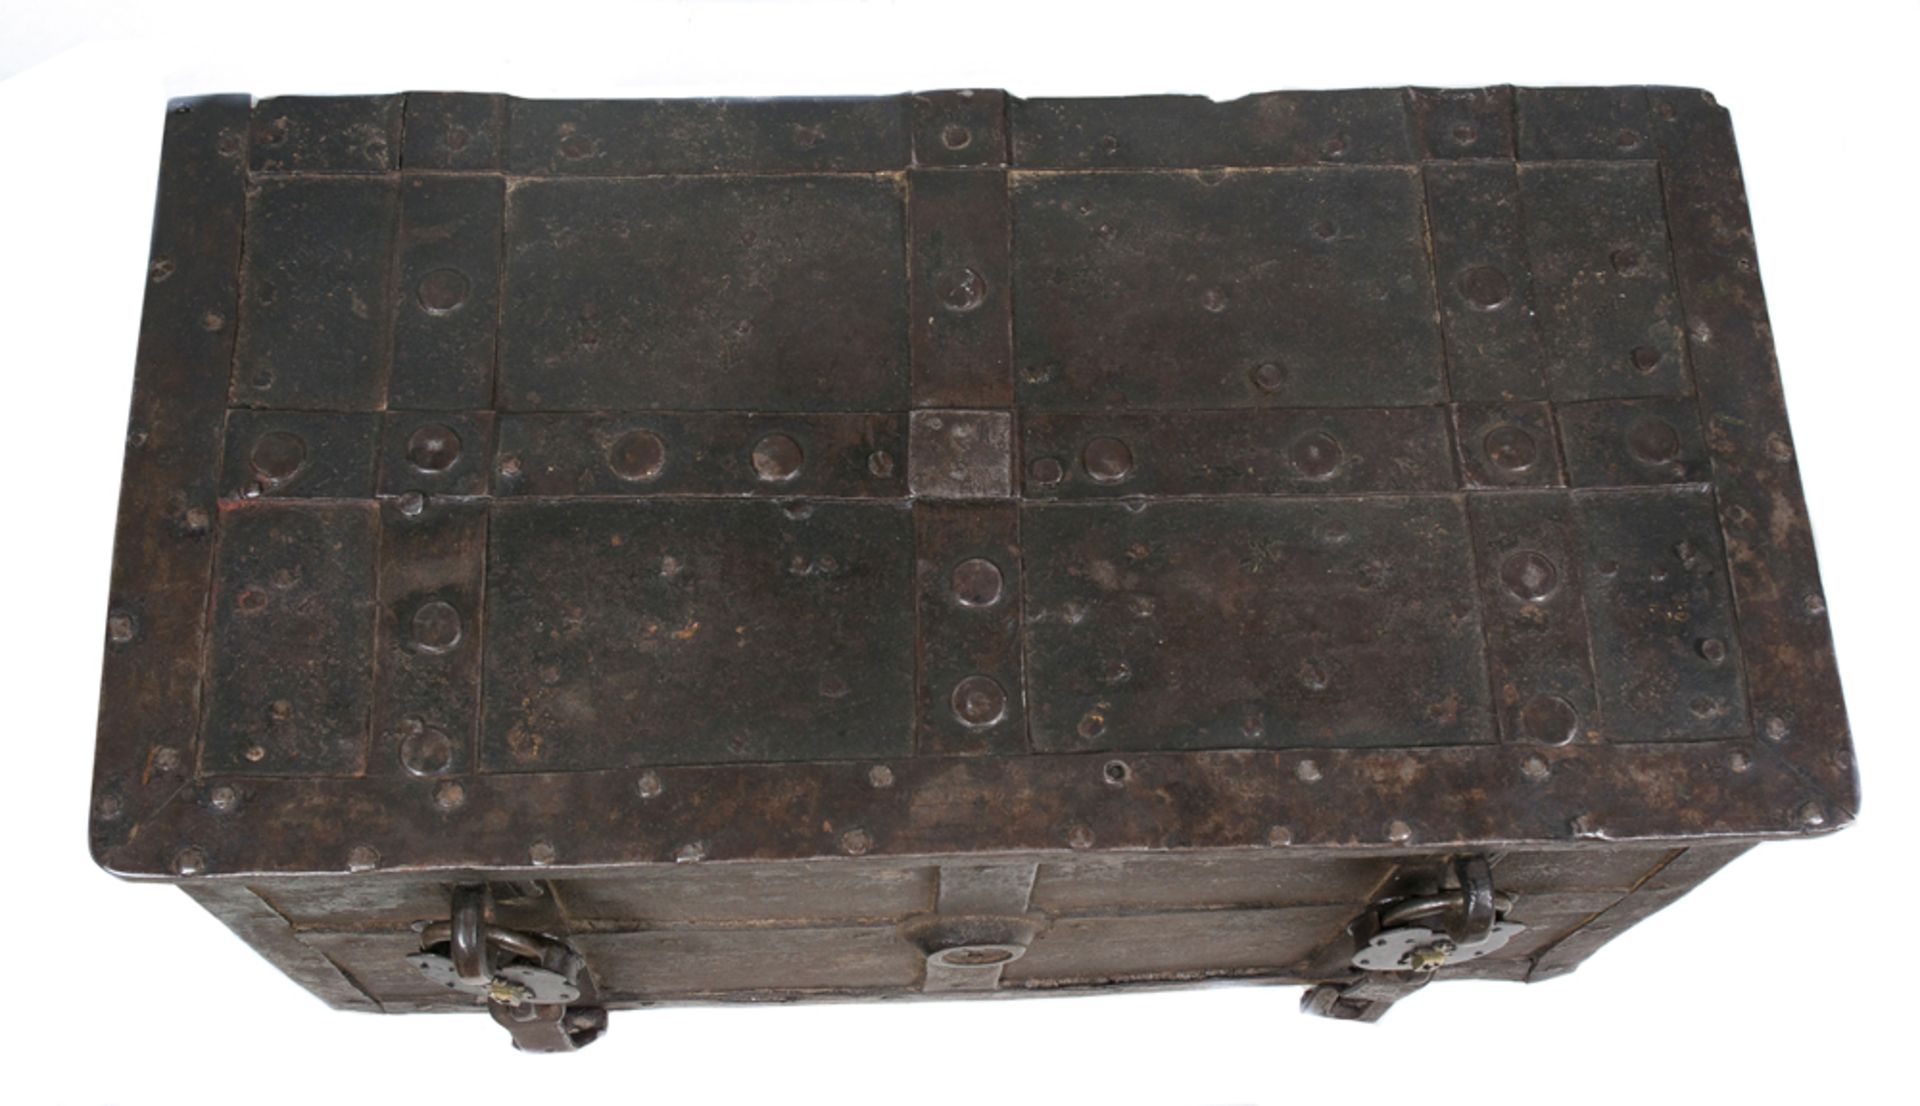 Wrought iron strong box. Nuremberg or Augsburg. Late 16th century. - Image 5 of 6